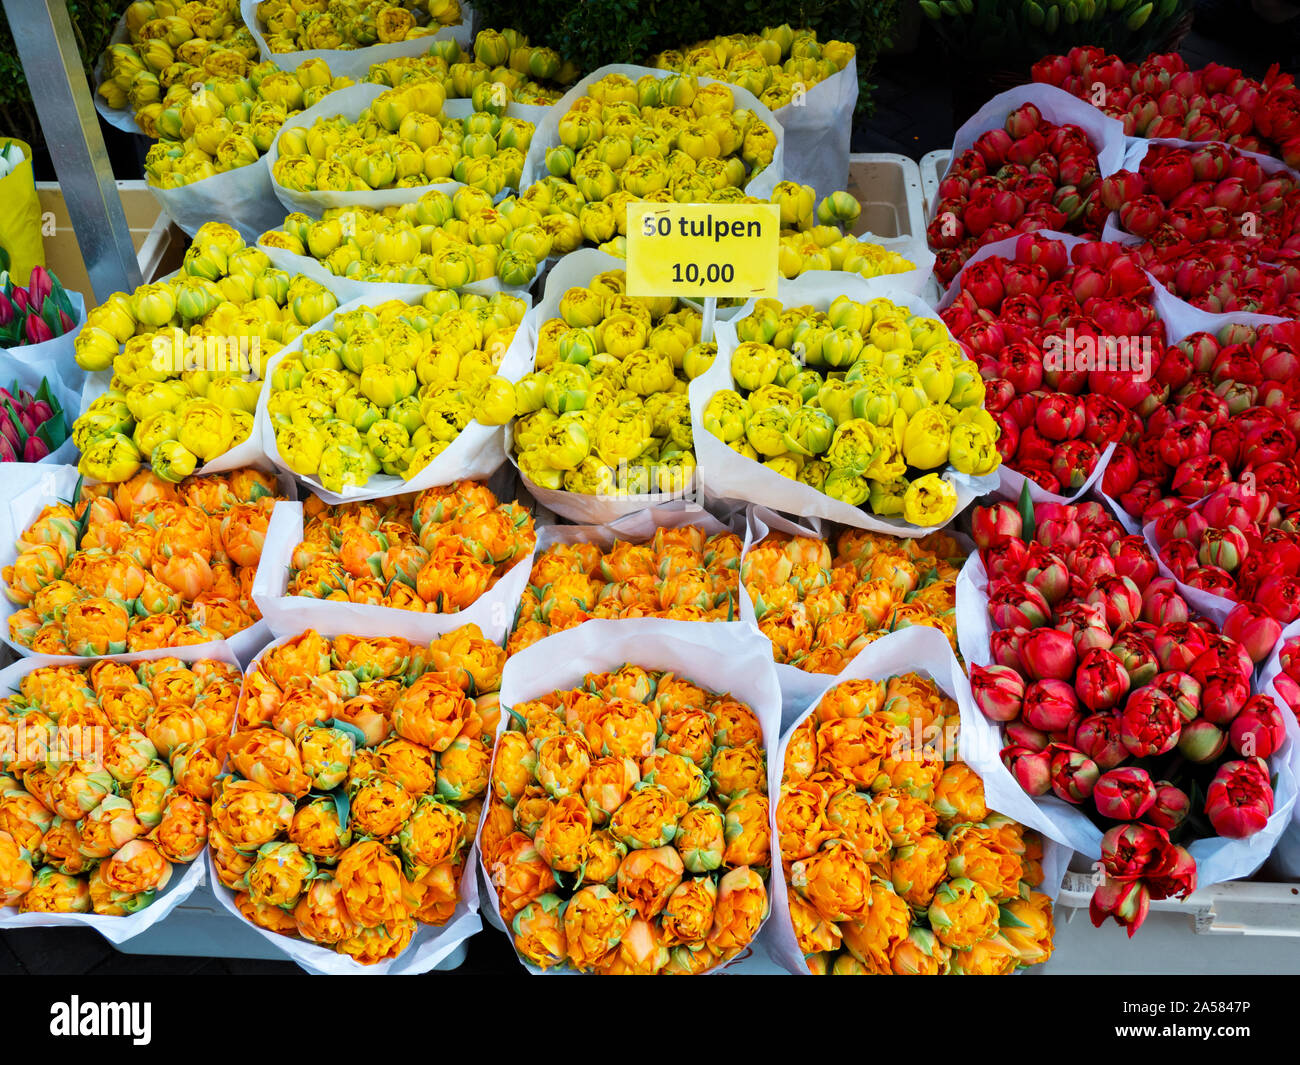 Orange, yellow and red tulips for sale at market, Amsterdam, Netherlands Stock Photo